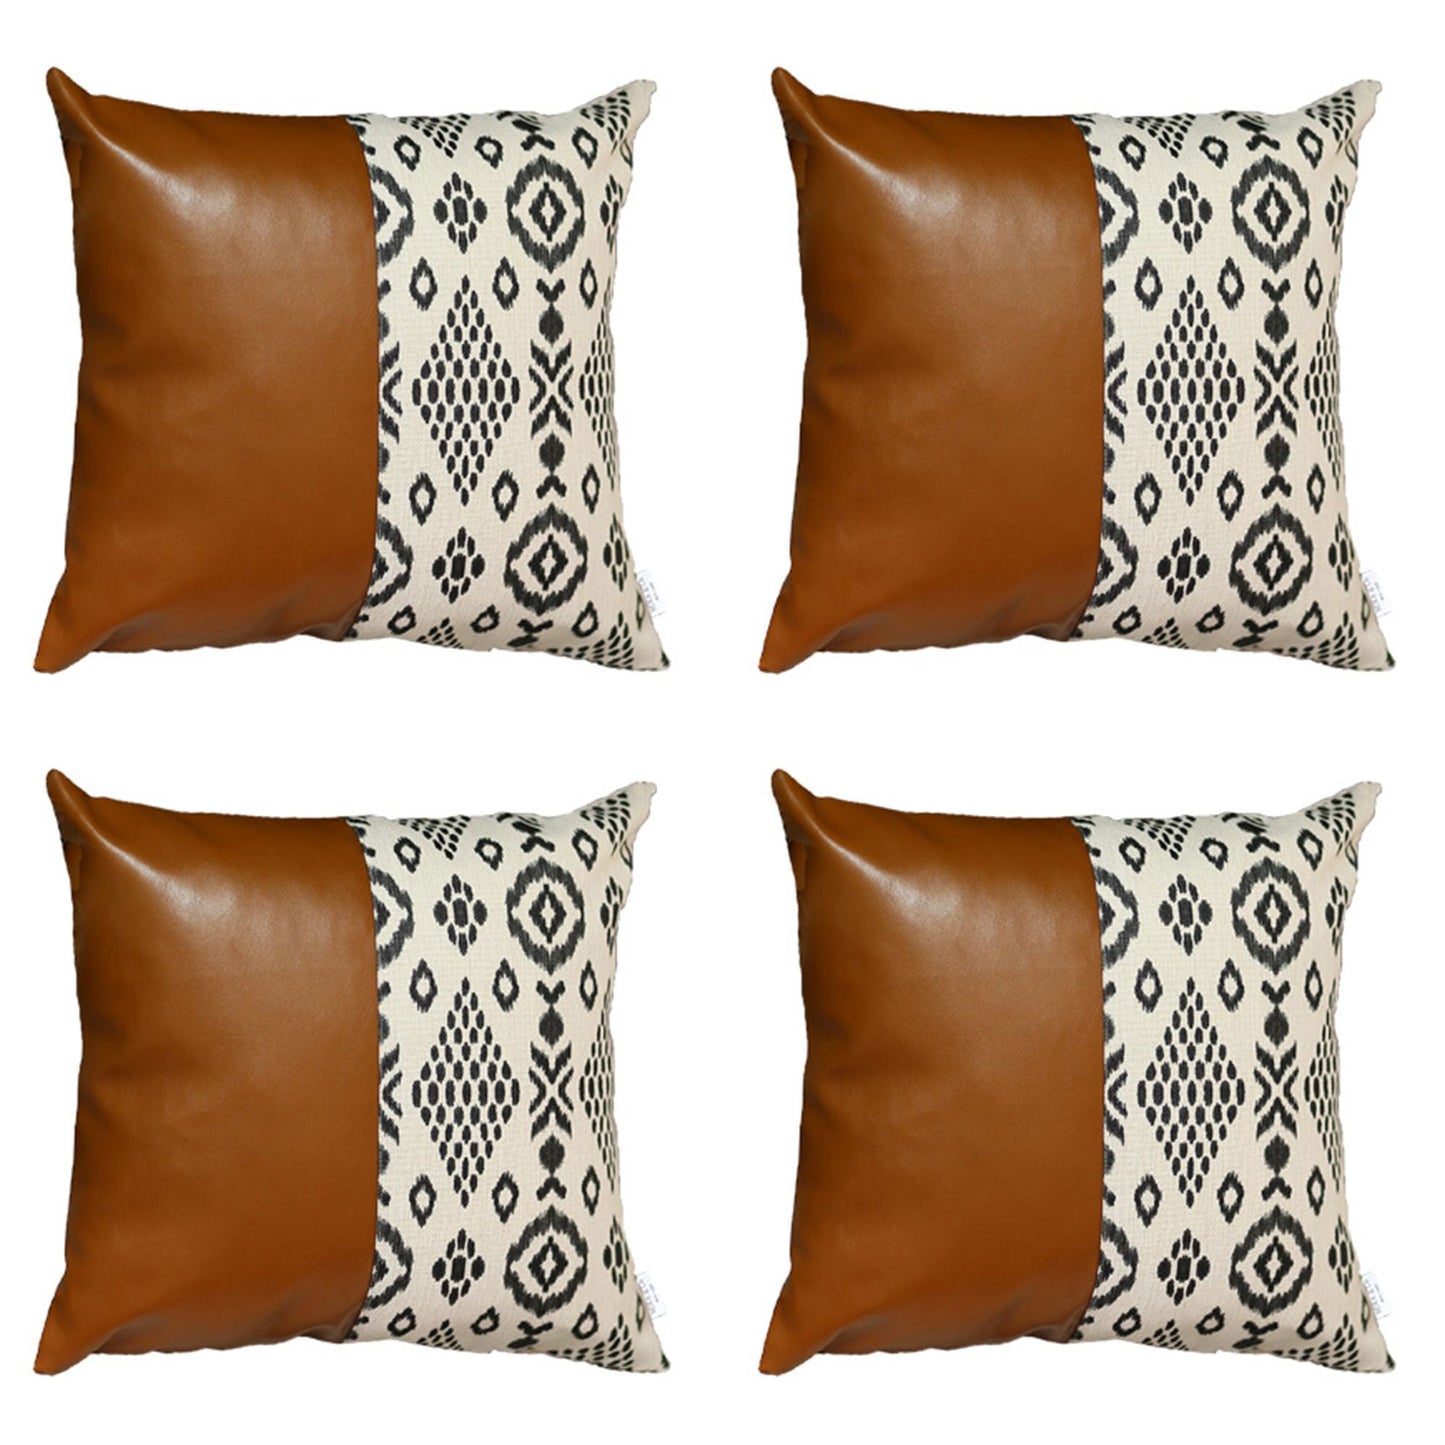 Vegan Faux Leather Handcrafted Decorative Throw Pillow Cover (Geometric Square)